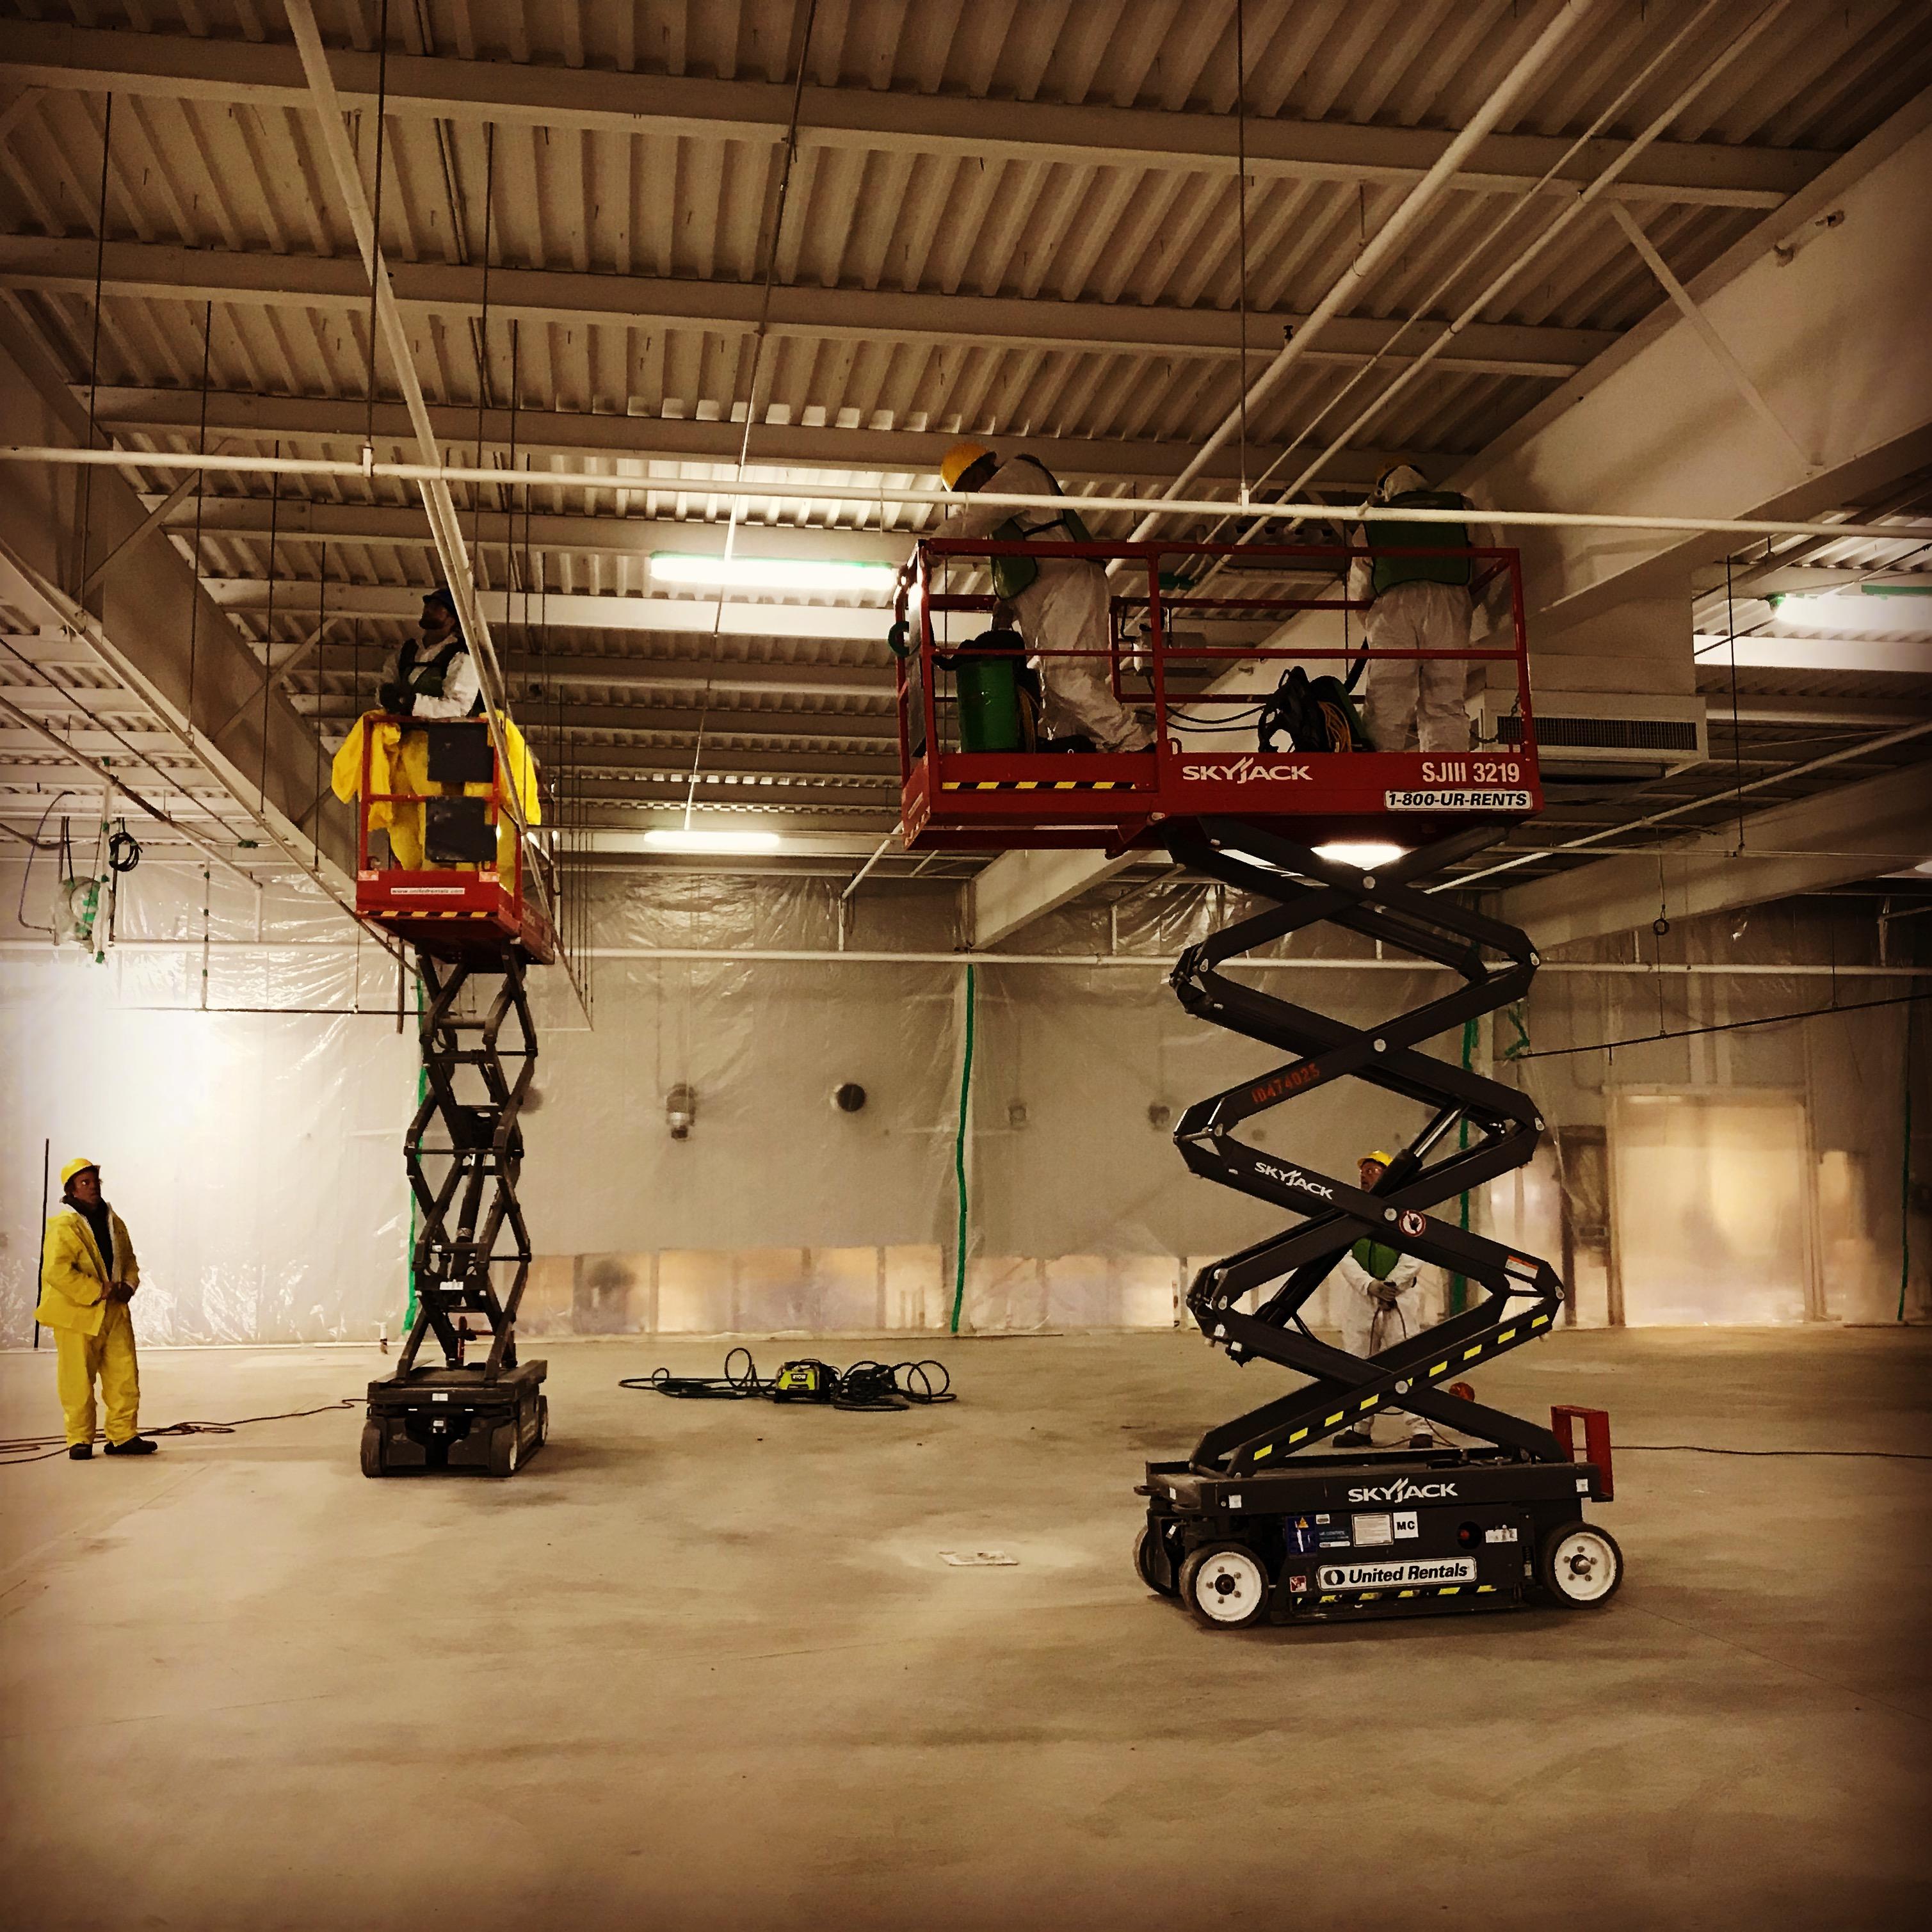 You can't be afraid of heights with SERVPRO! Our team is working hard on a commercial job.